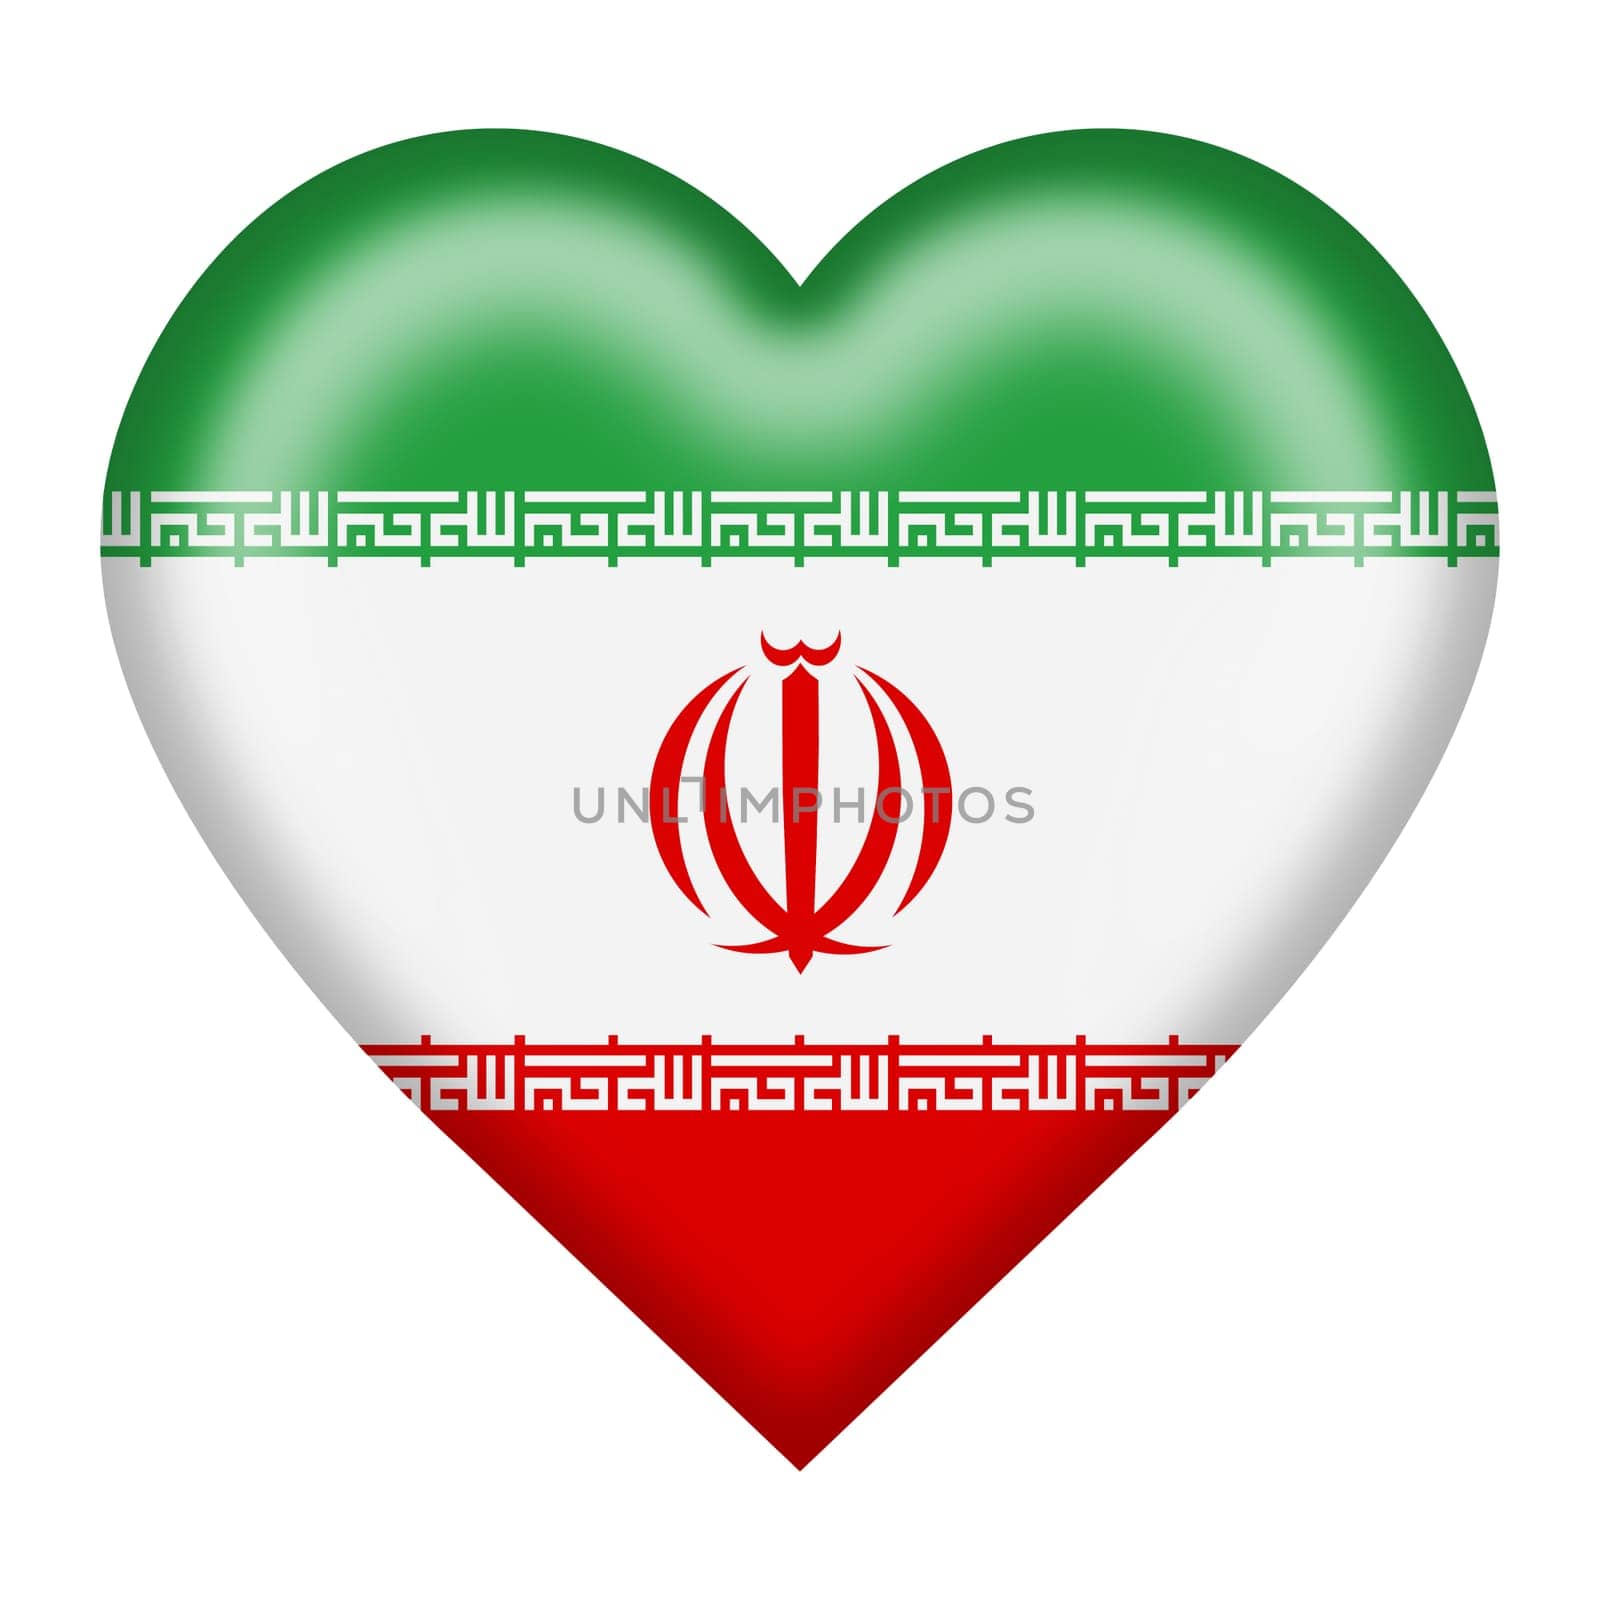 An Iran flag heart button isolated on white with clipping path red white green emblem Allah takbir